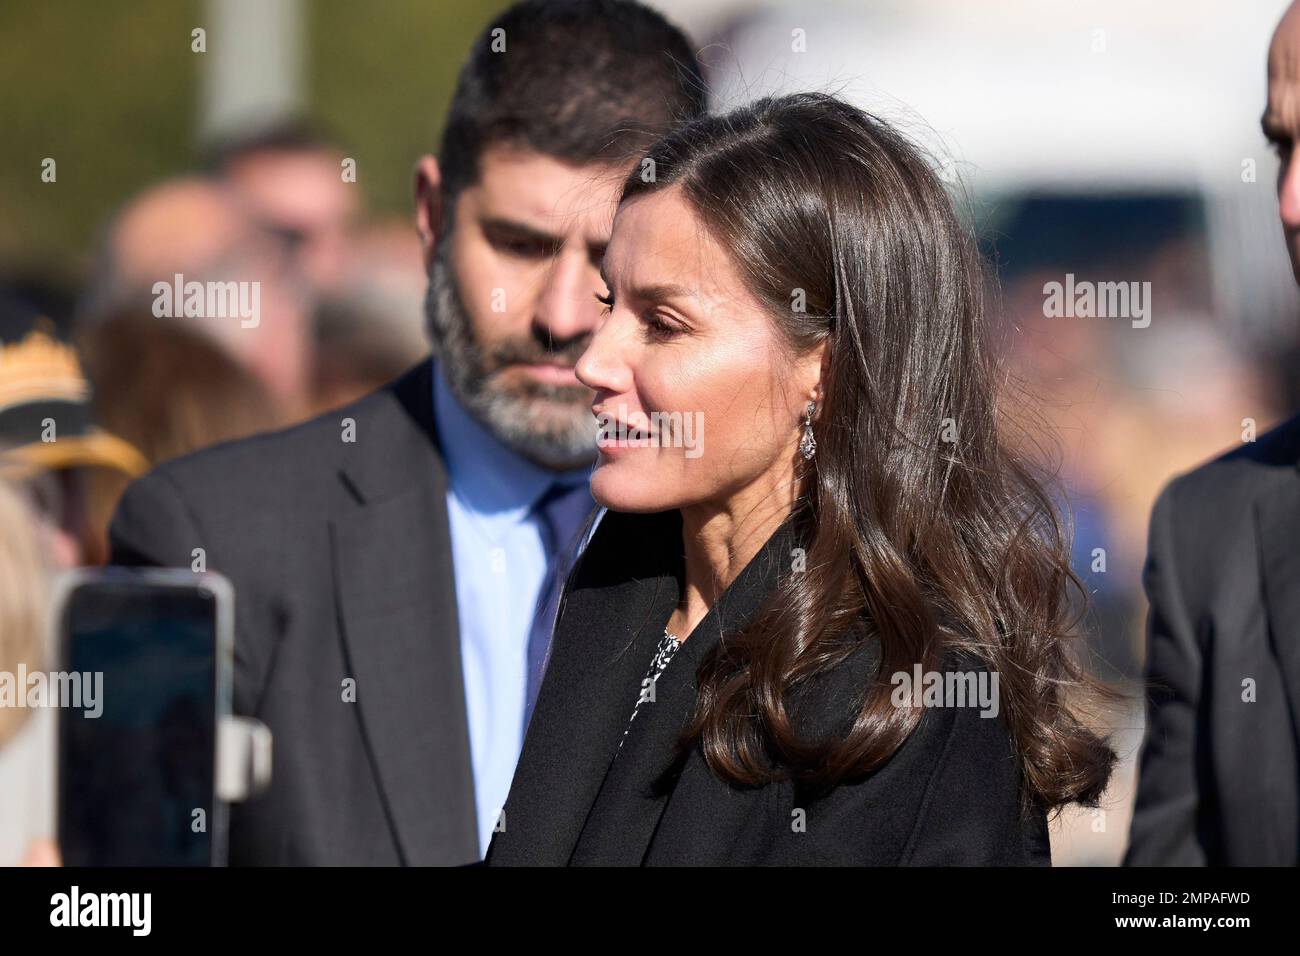 Petrer. Spain. 20230131,  Queen Letizia of Spain attends 2nd Meeting of the Network of Direct Care Centres and Specialised Services of the Spanish Federation for Rare Diseases (FEDER) at Sense Barreres day care centre on January 31, 2023 in Petrer, Spain Credit: MPG/Alamy Live News Stock Photo